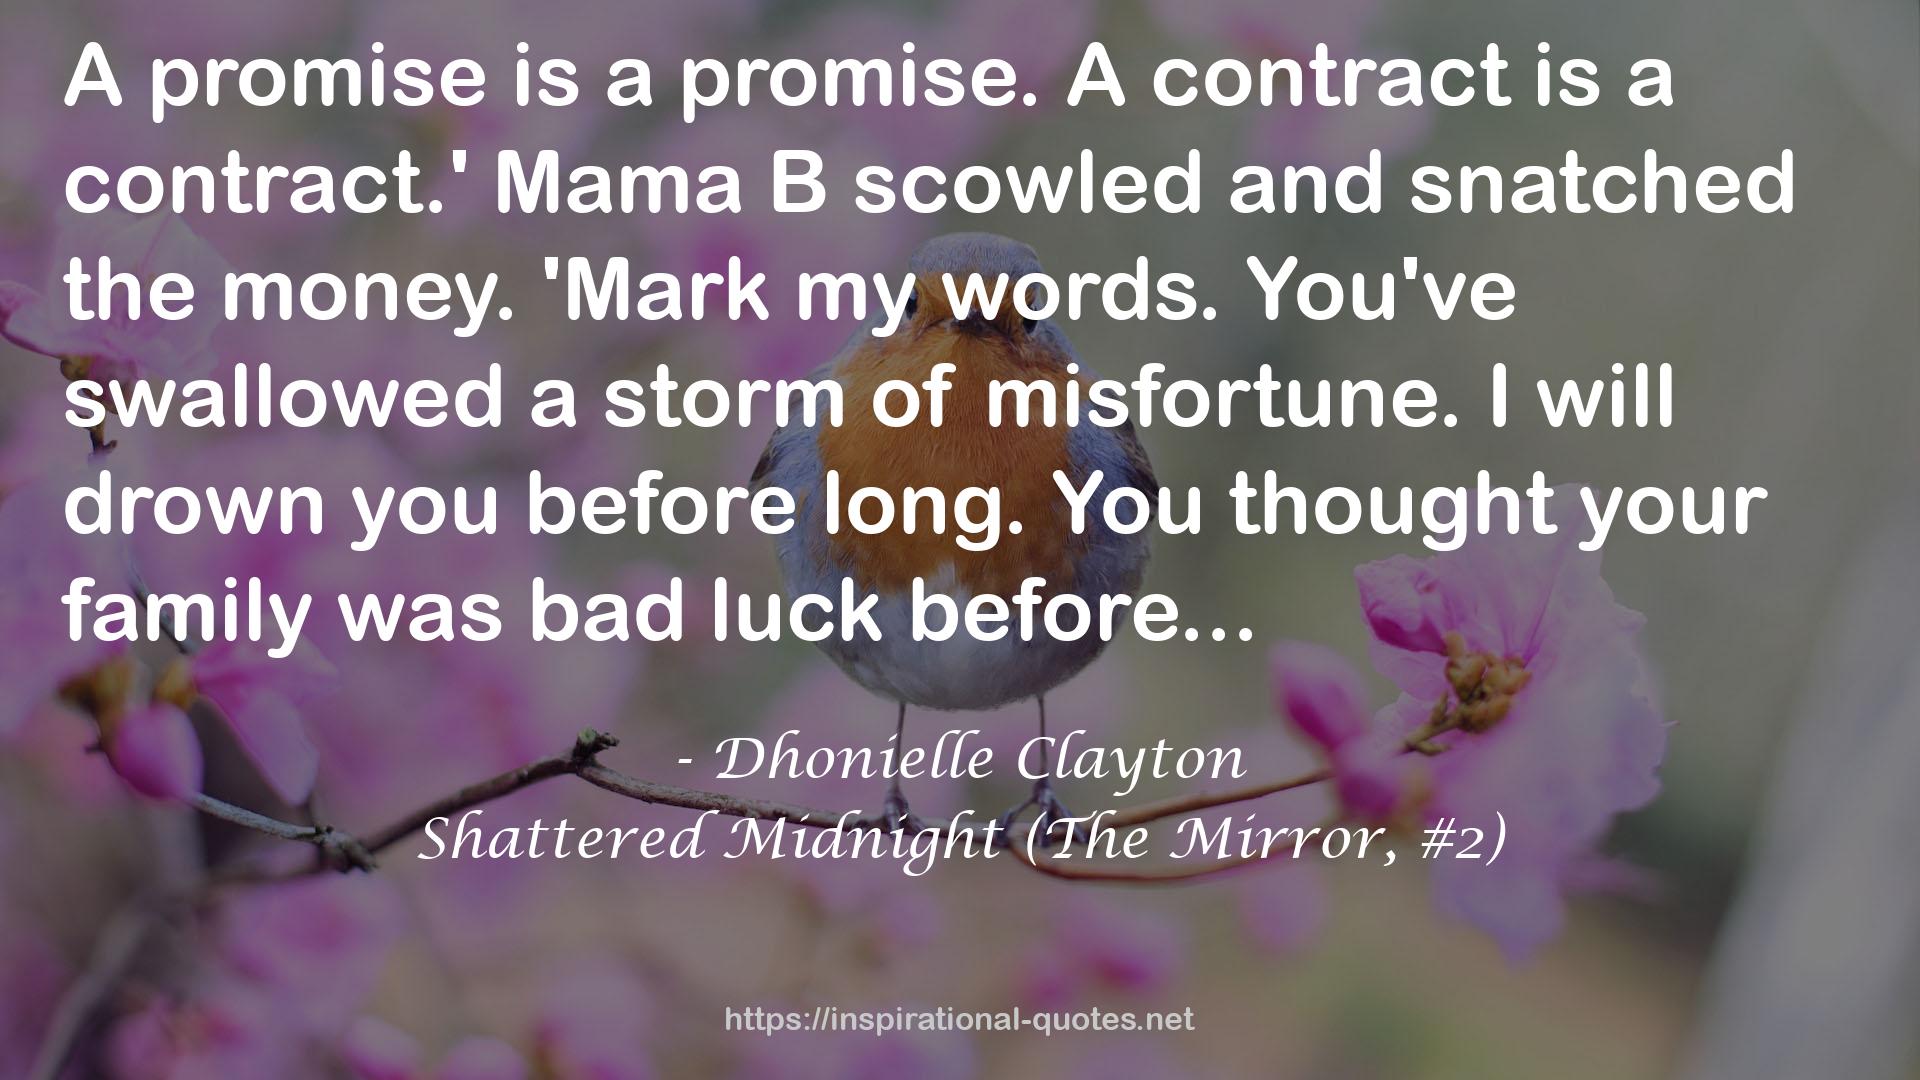 Shattered Midnight (The Mirror, #2) QUOTES